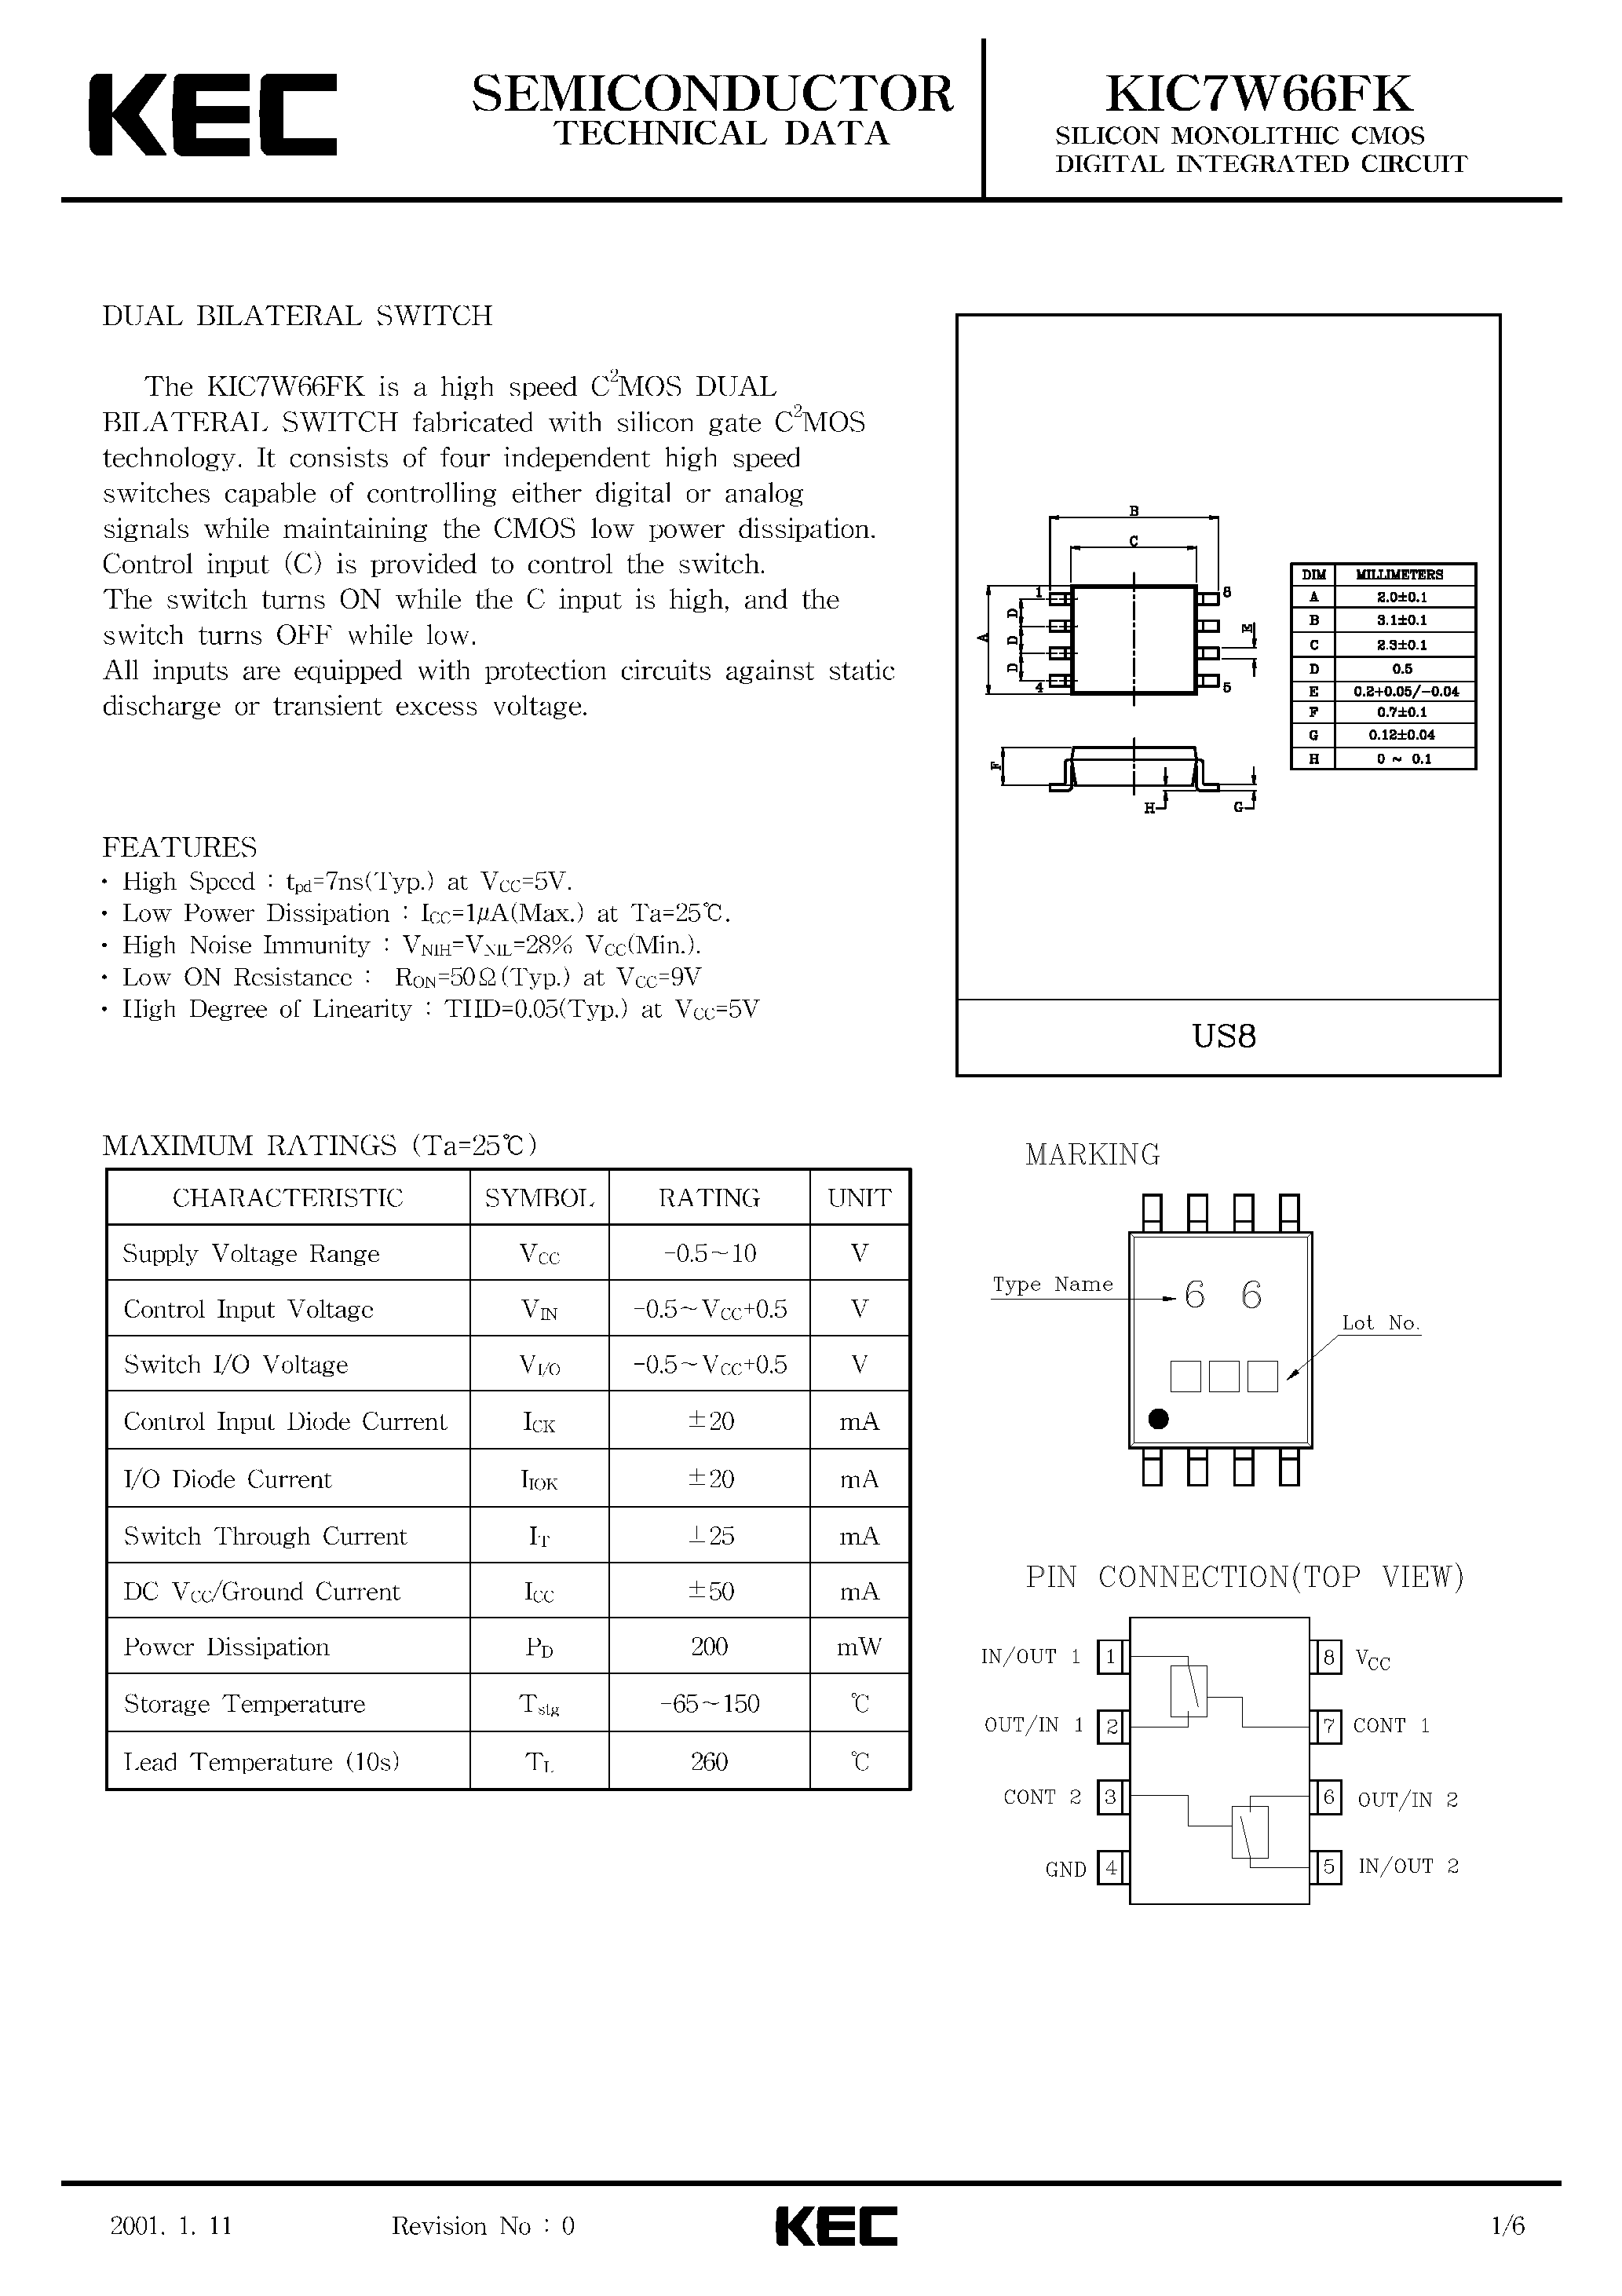 Datasheet KIC7W66FK - SILICON MONOLITHIC CMOS DIGITAL INTEGRATED CIRCUIT(DAUL BILATERAL SWITCH) page 1